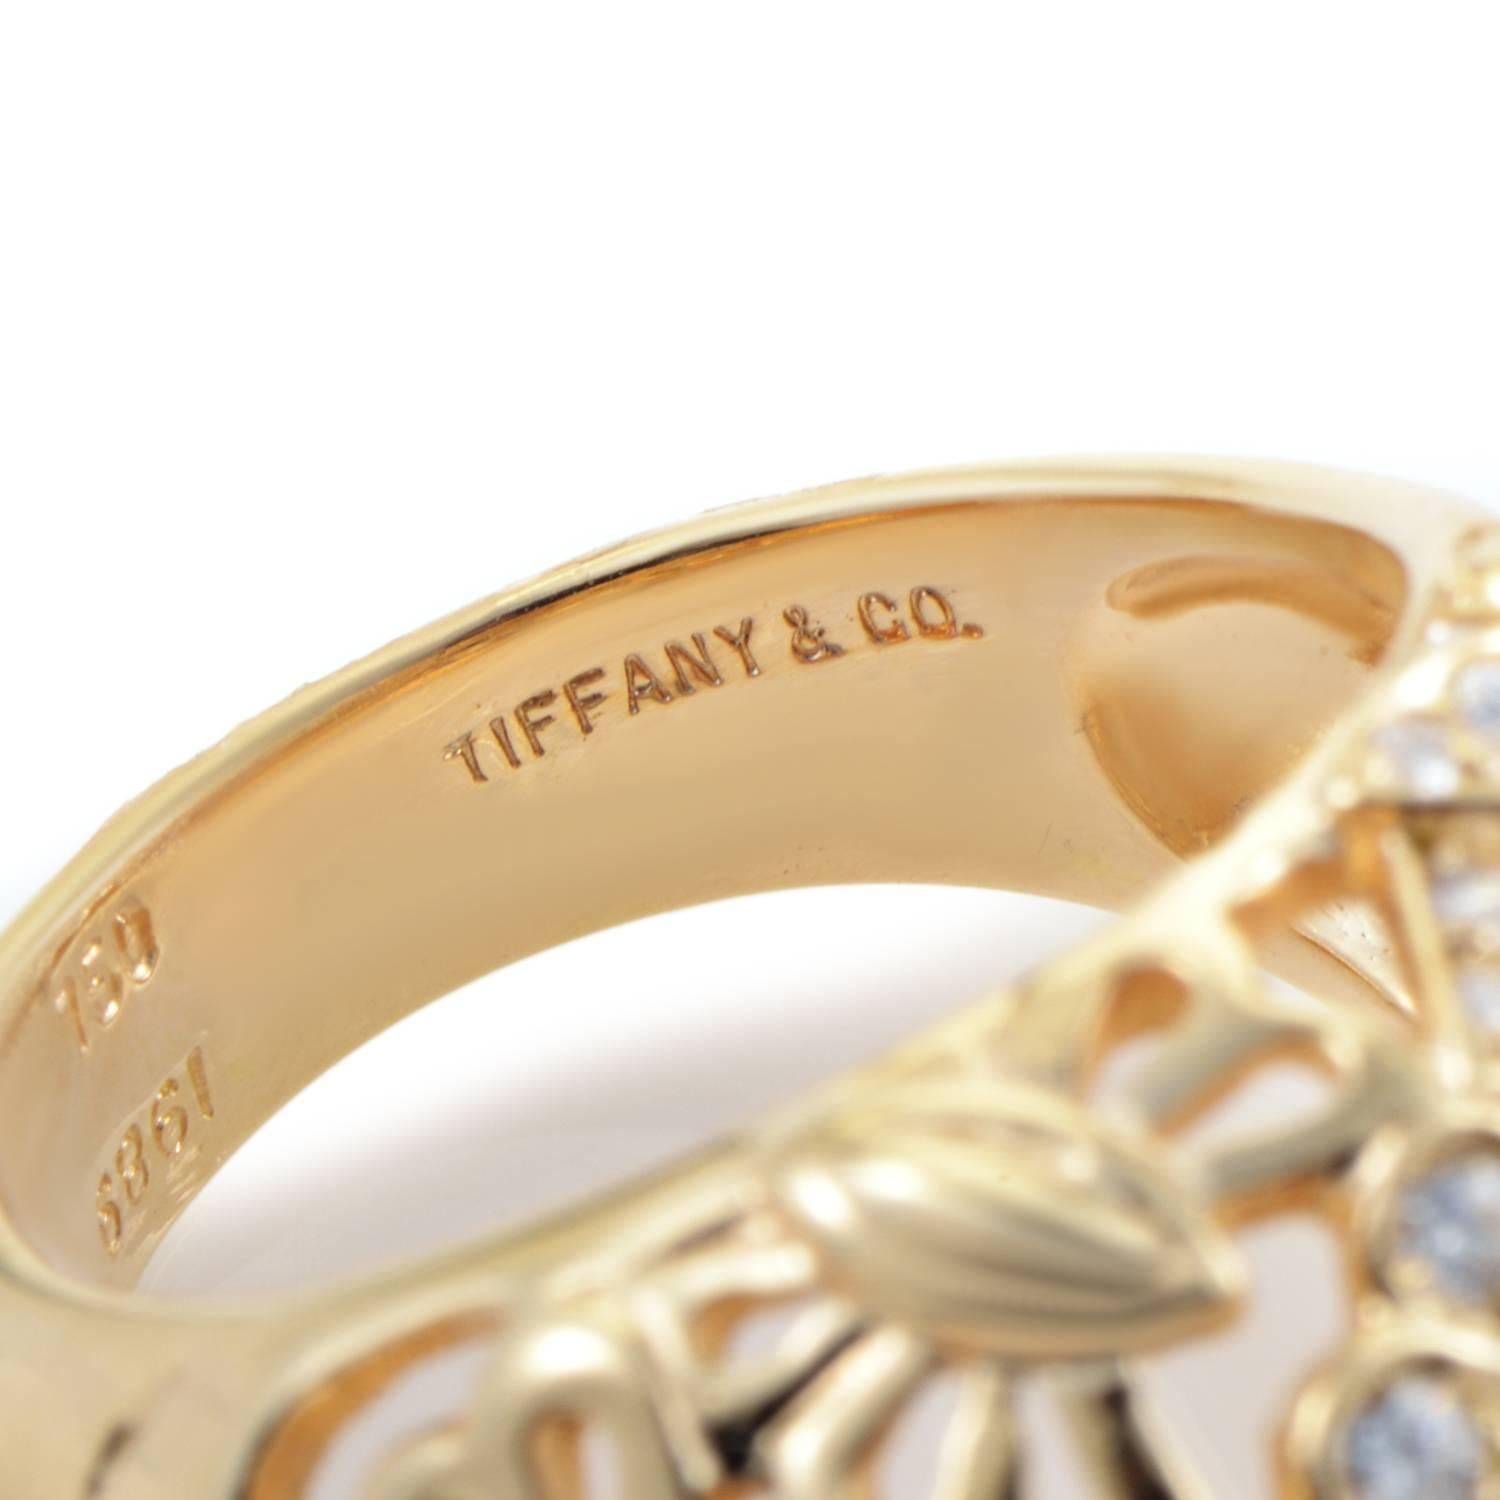 Women's Tiffany & Co. Yellow Gold and Diamond Floral Cocktail Ring